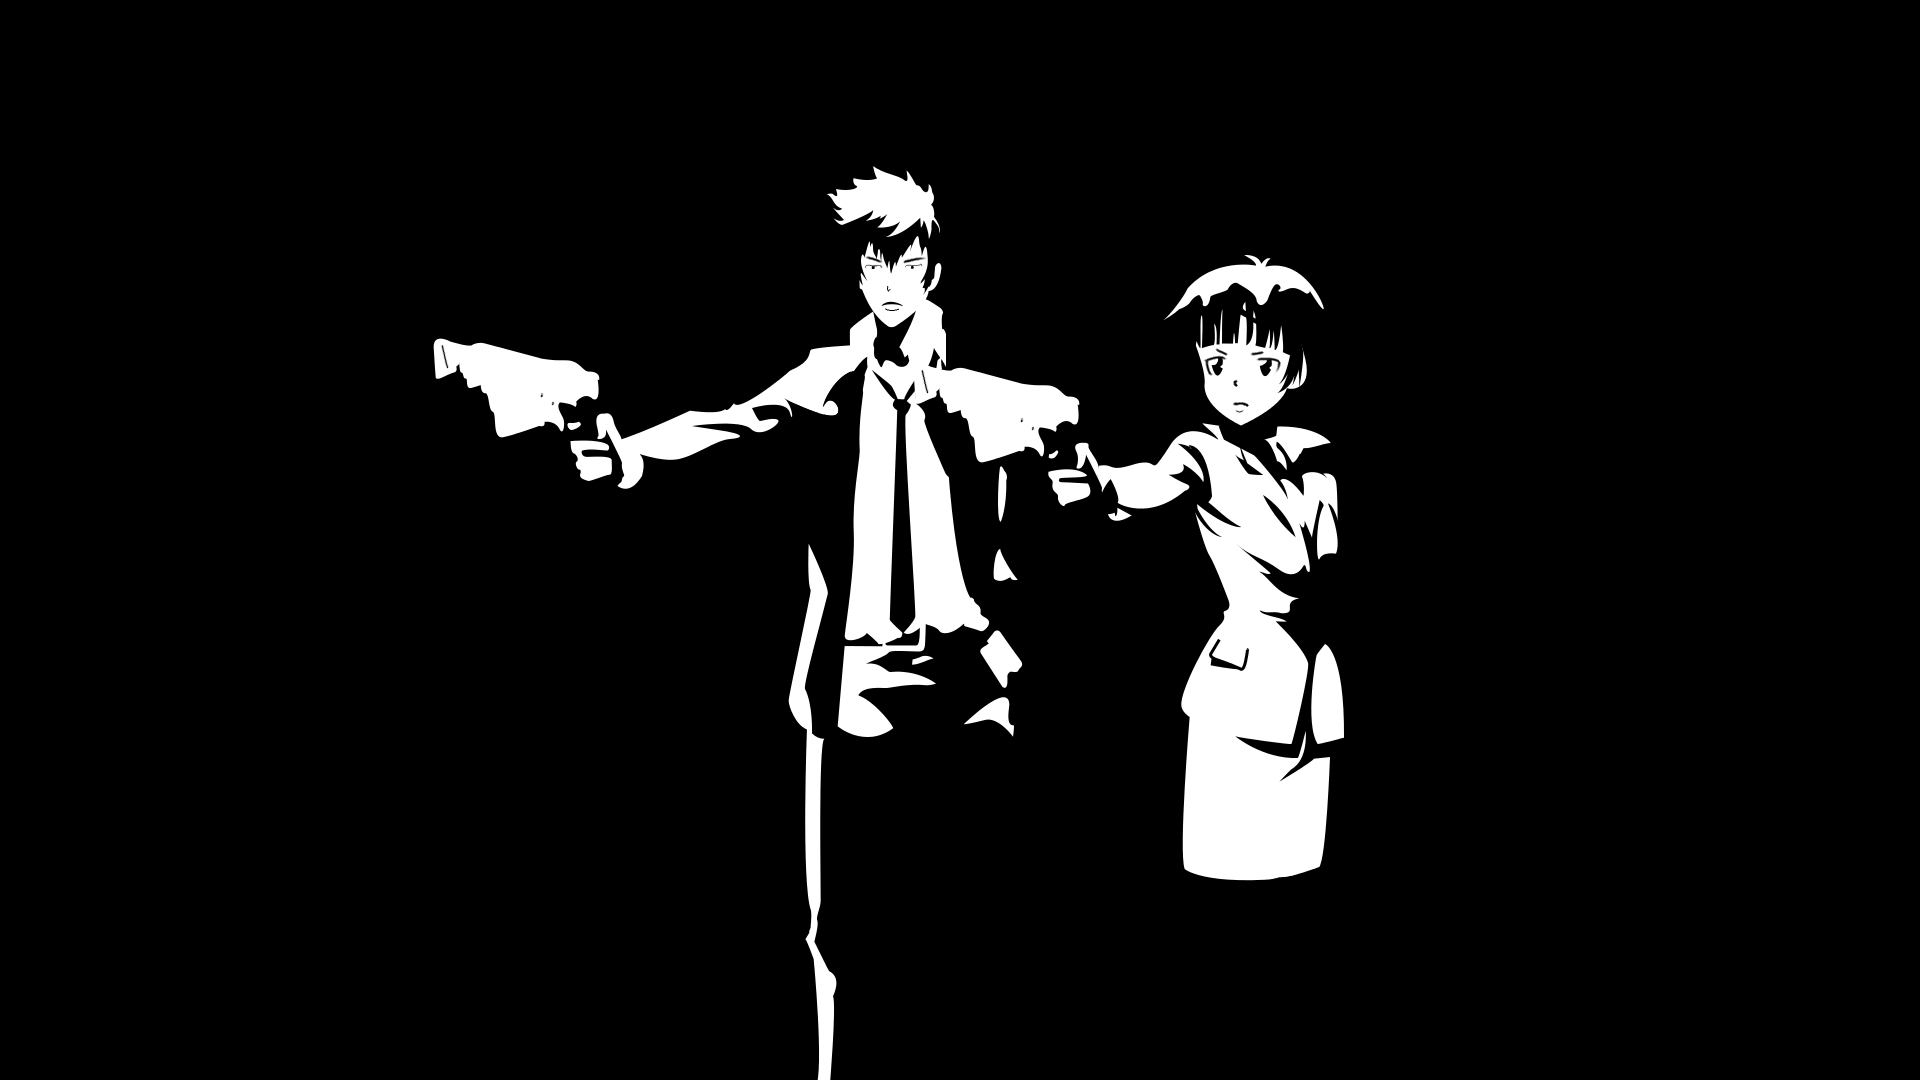 Psycho Pass Iphone Wallpapers Top Free Psycho Pass Iphone Backgrounds Wallpaperaccess